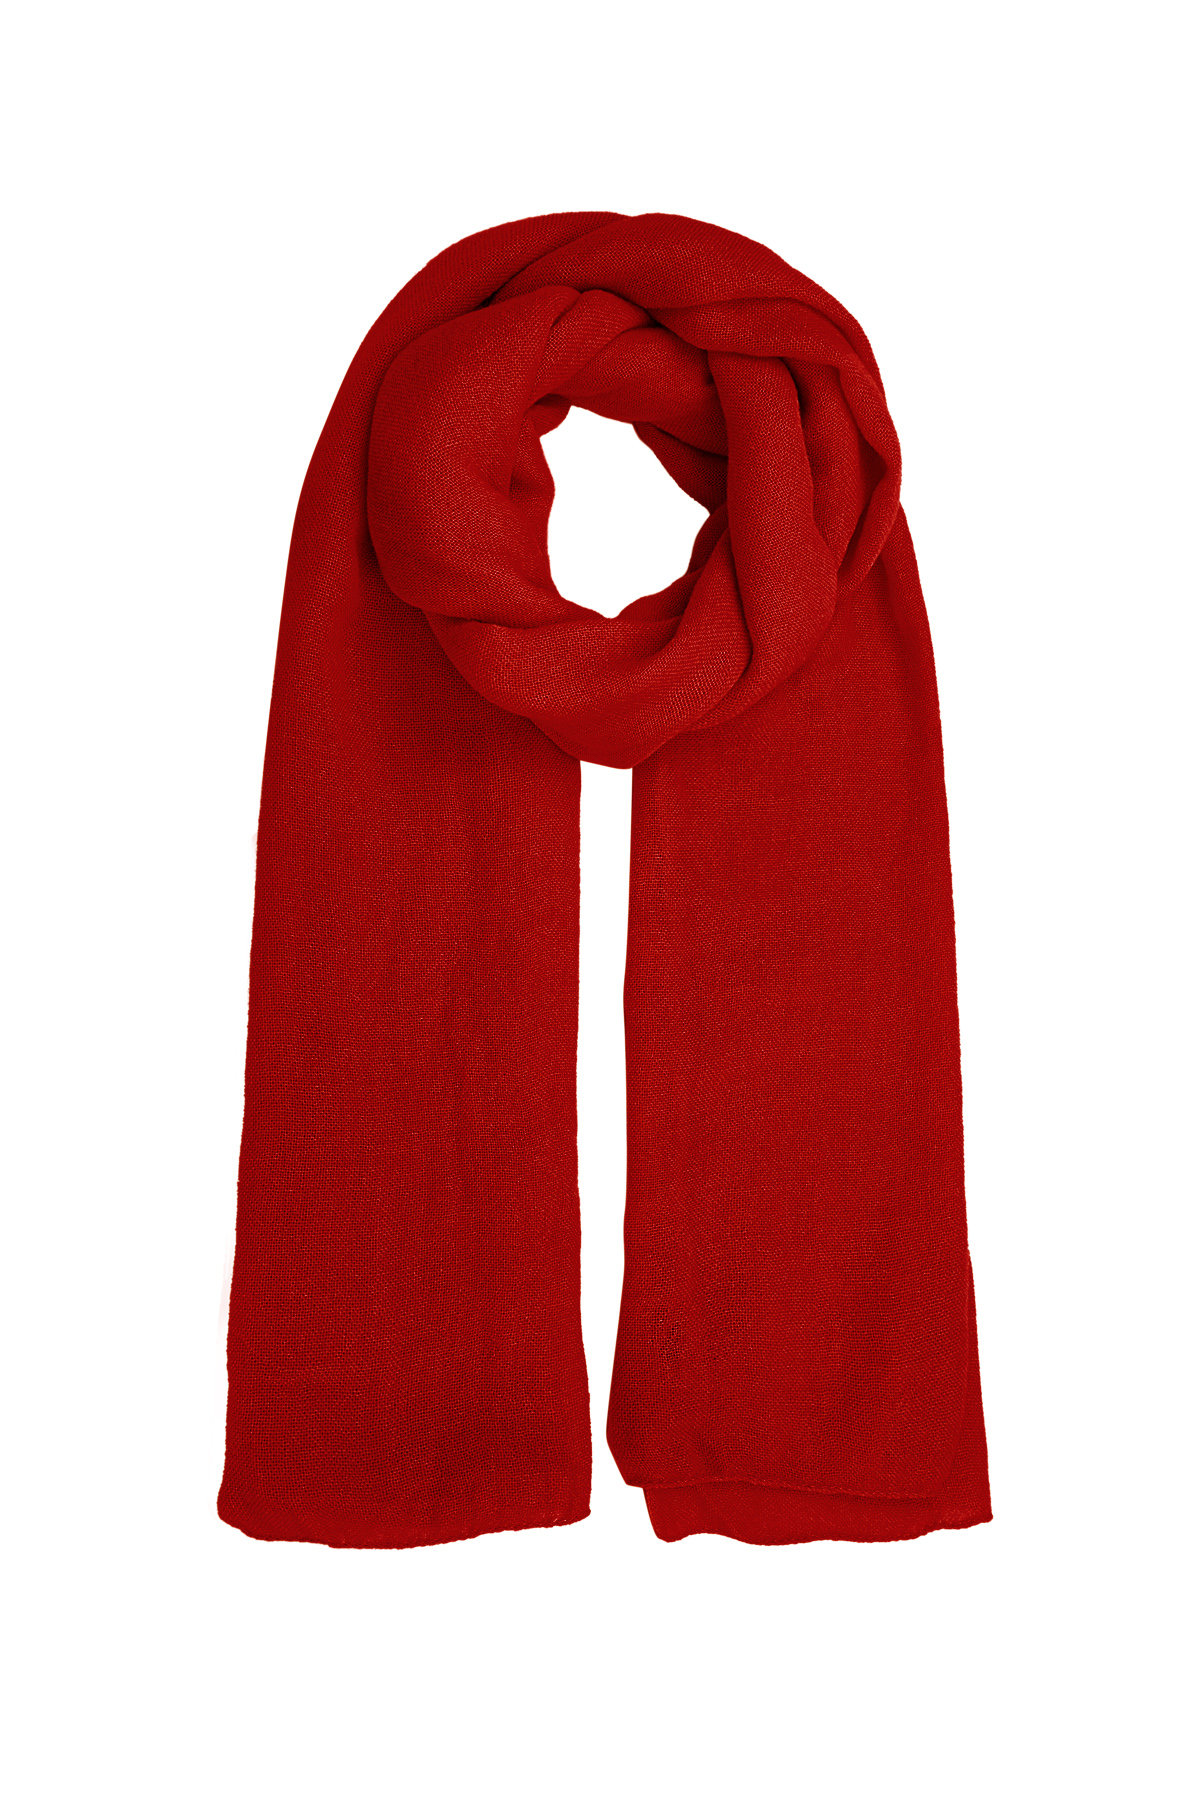 Scarf solid color - red h5 